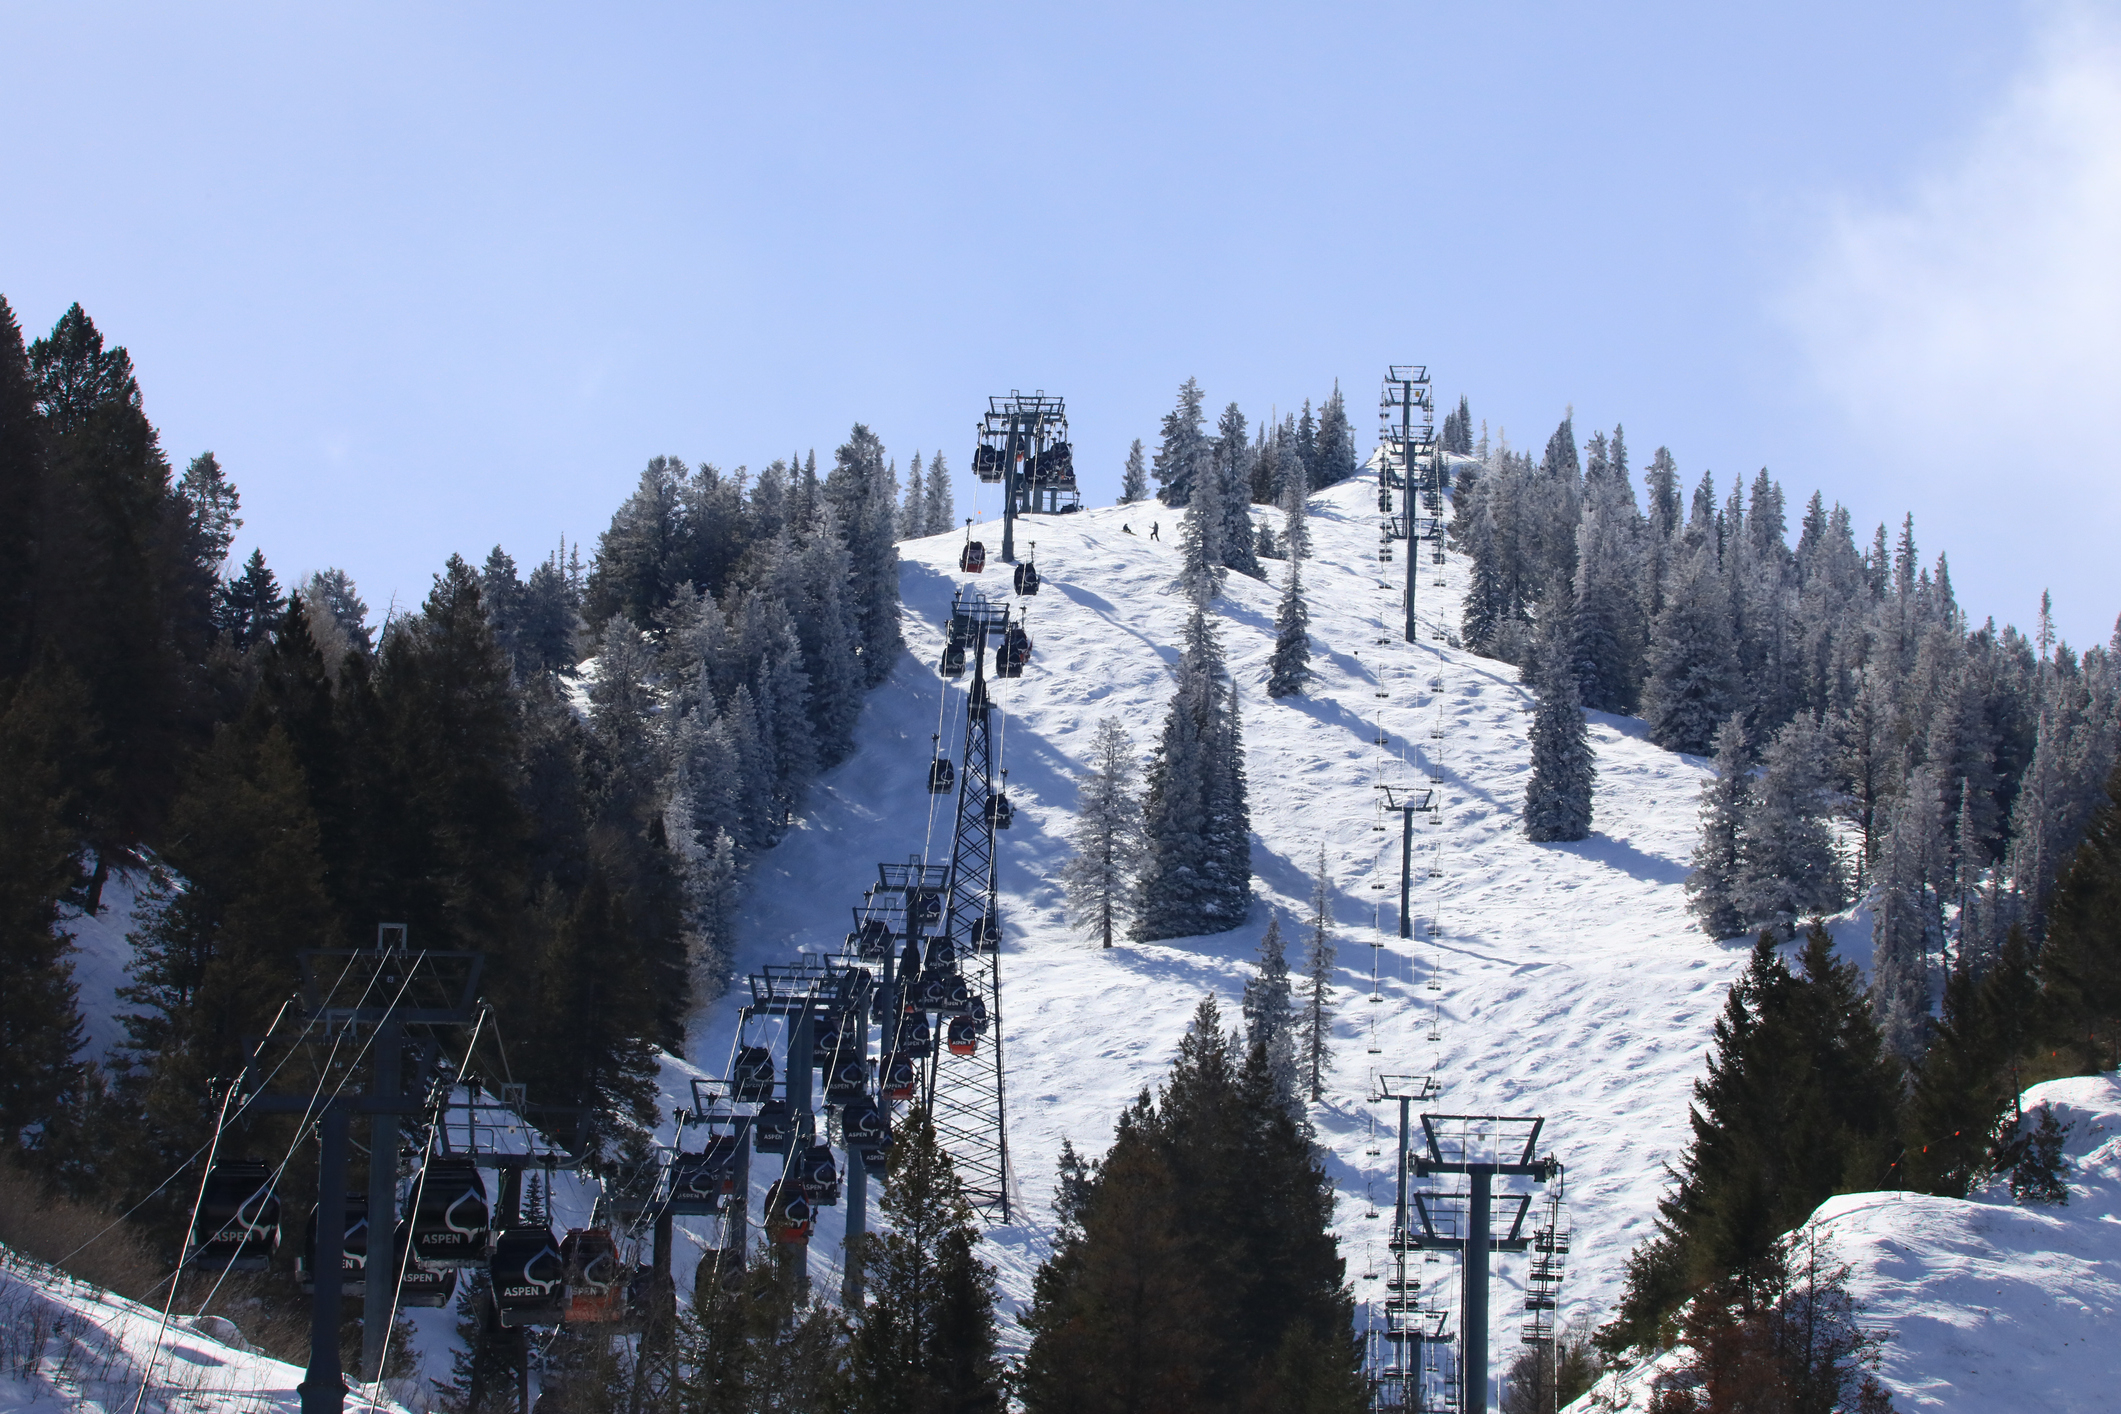 Ski lift with chairs ascending and descending a snowy mountain slope, surrounded by trees